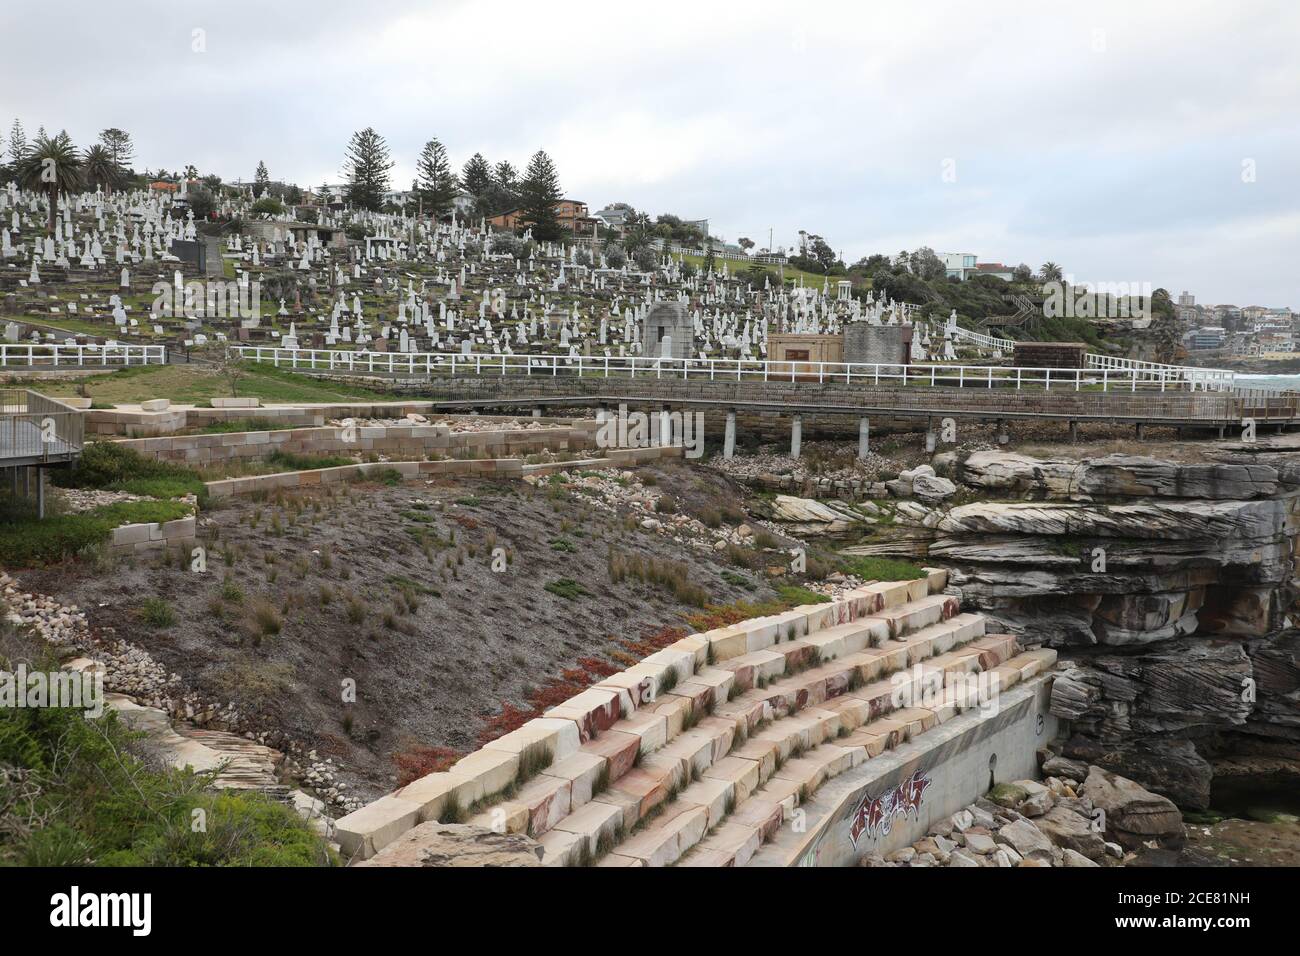 A section of the Bondi to Coogee Coastal Walk at Waverley Cemetery. Stock Photo